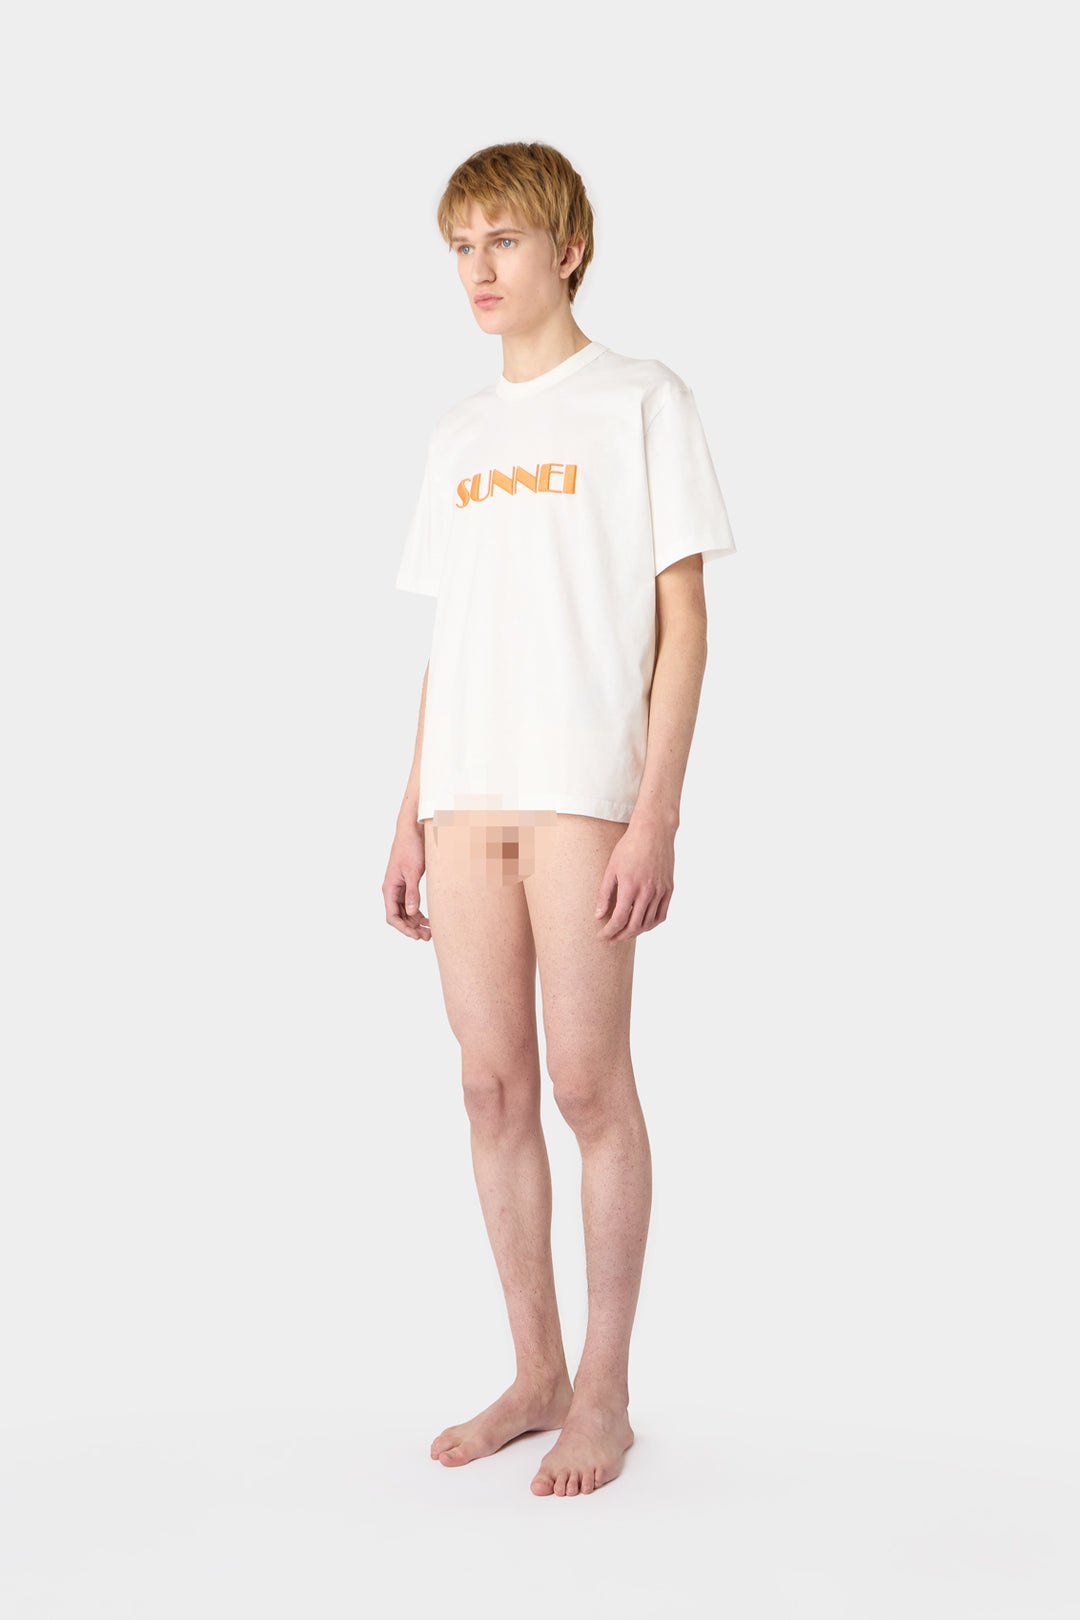 EMBROIDERED BIG LOGO T-SHIRT / off-white & peach - 4